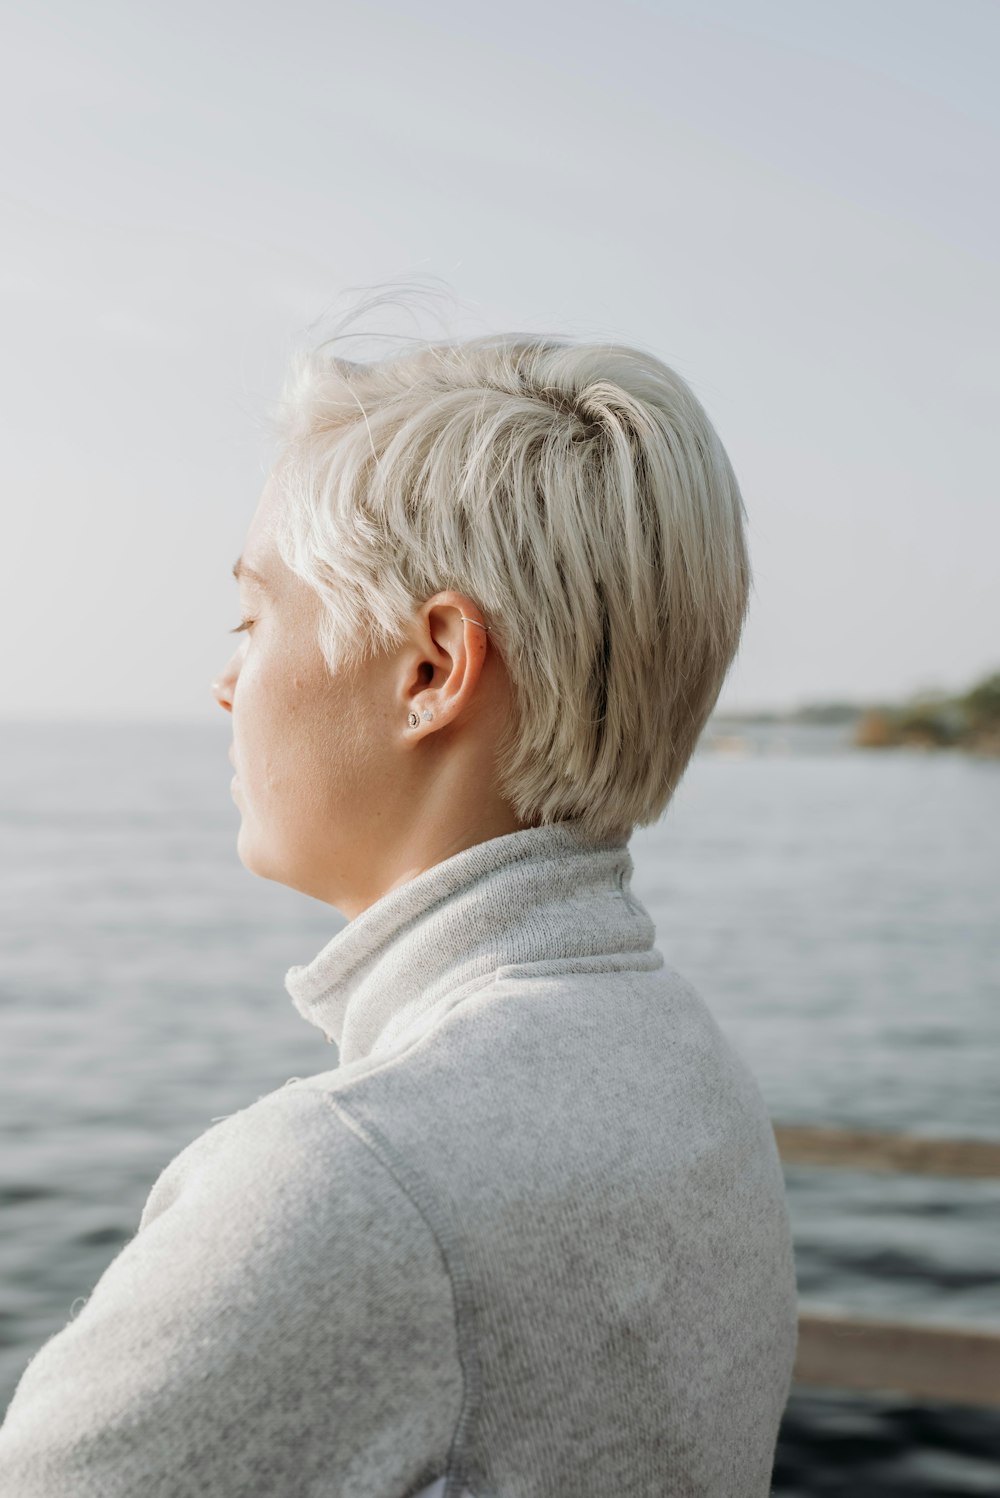 woman with blonde hair wearing gray sweater at dock